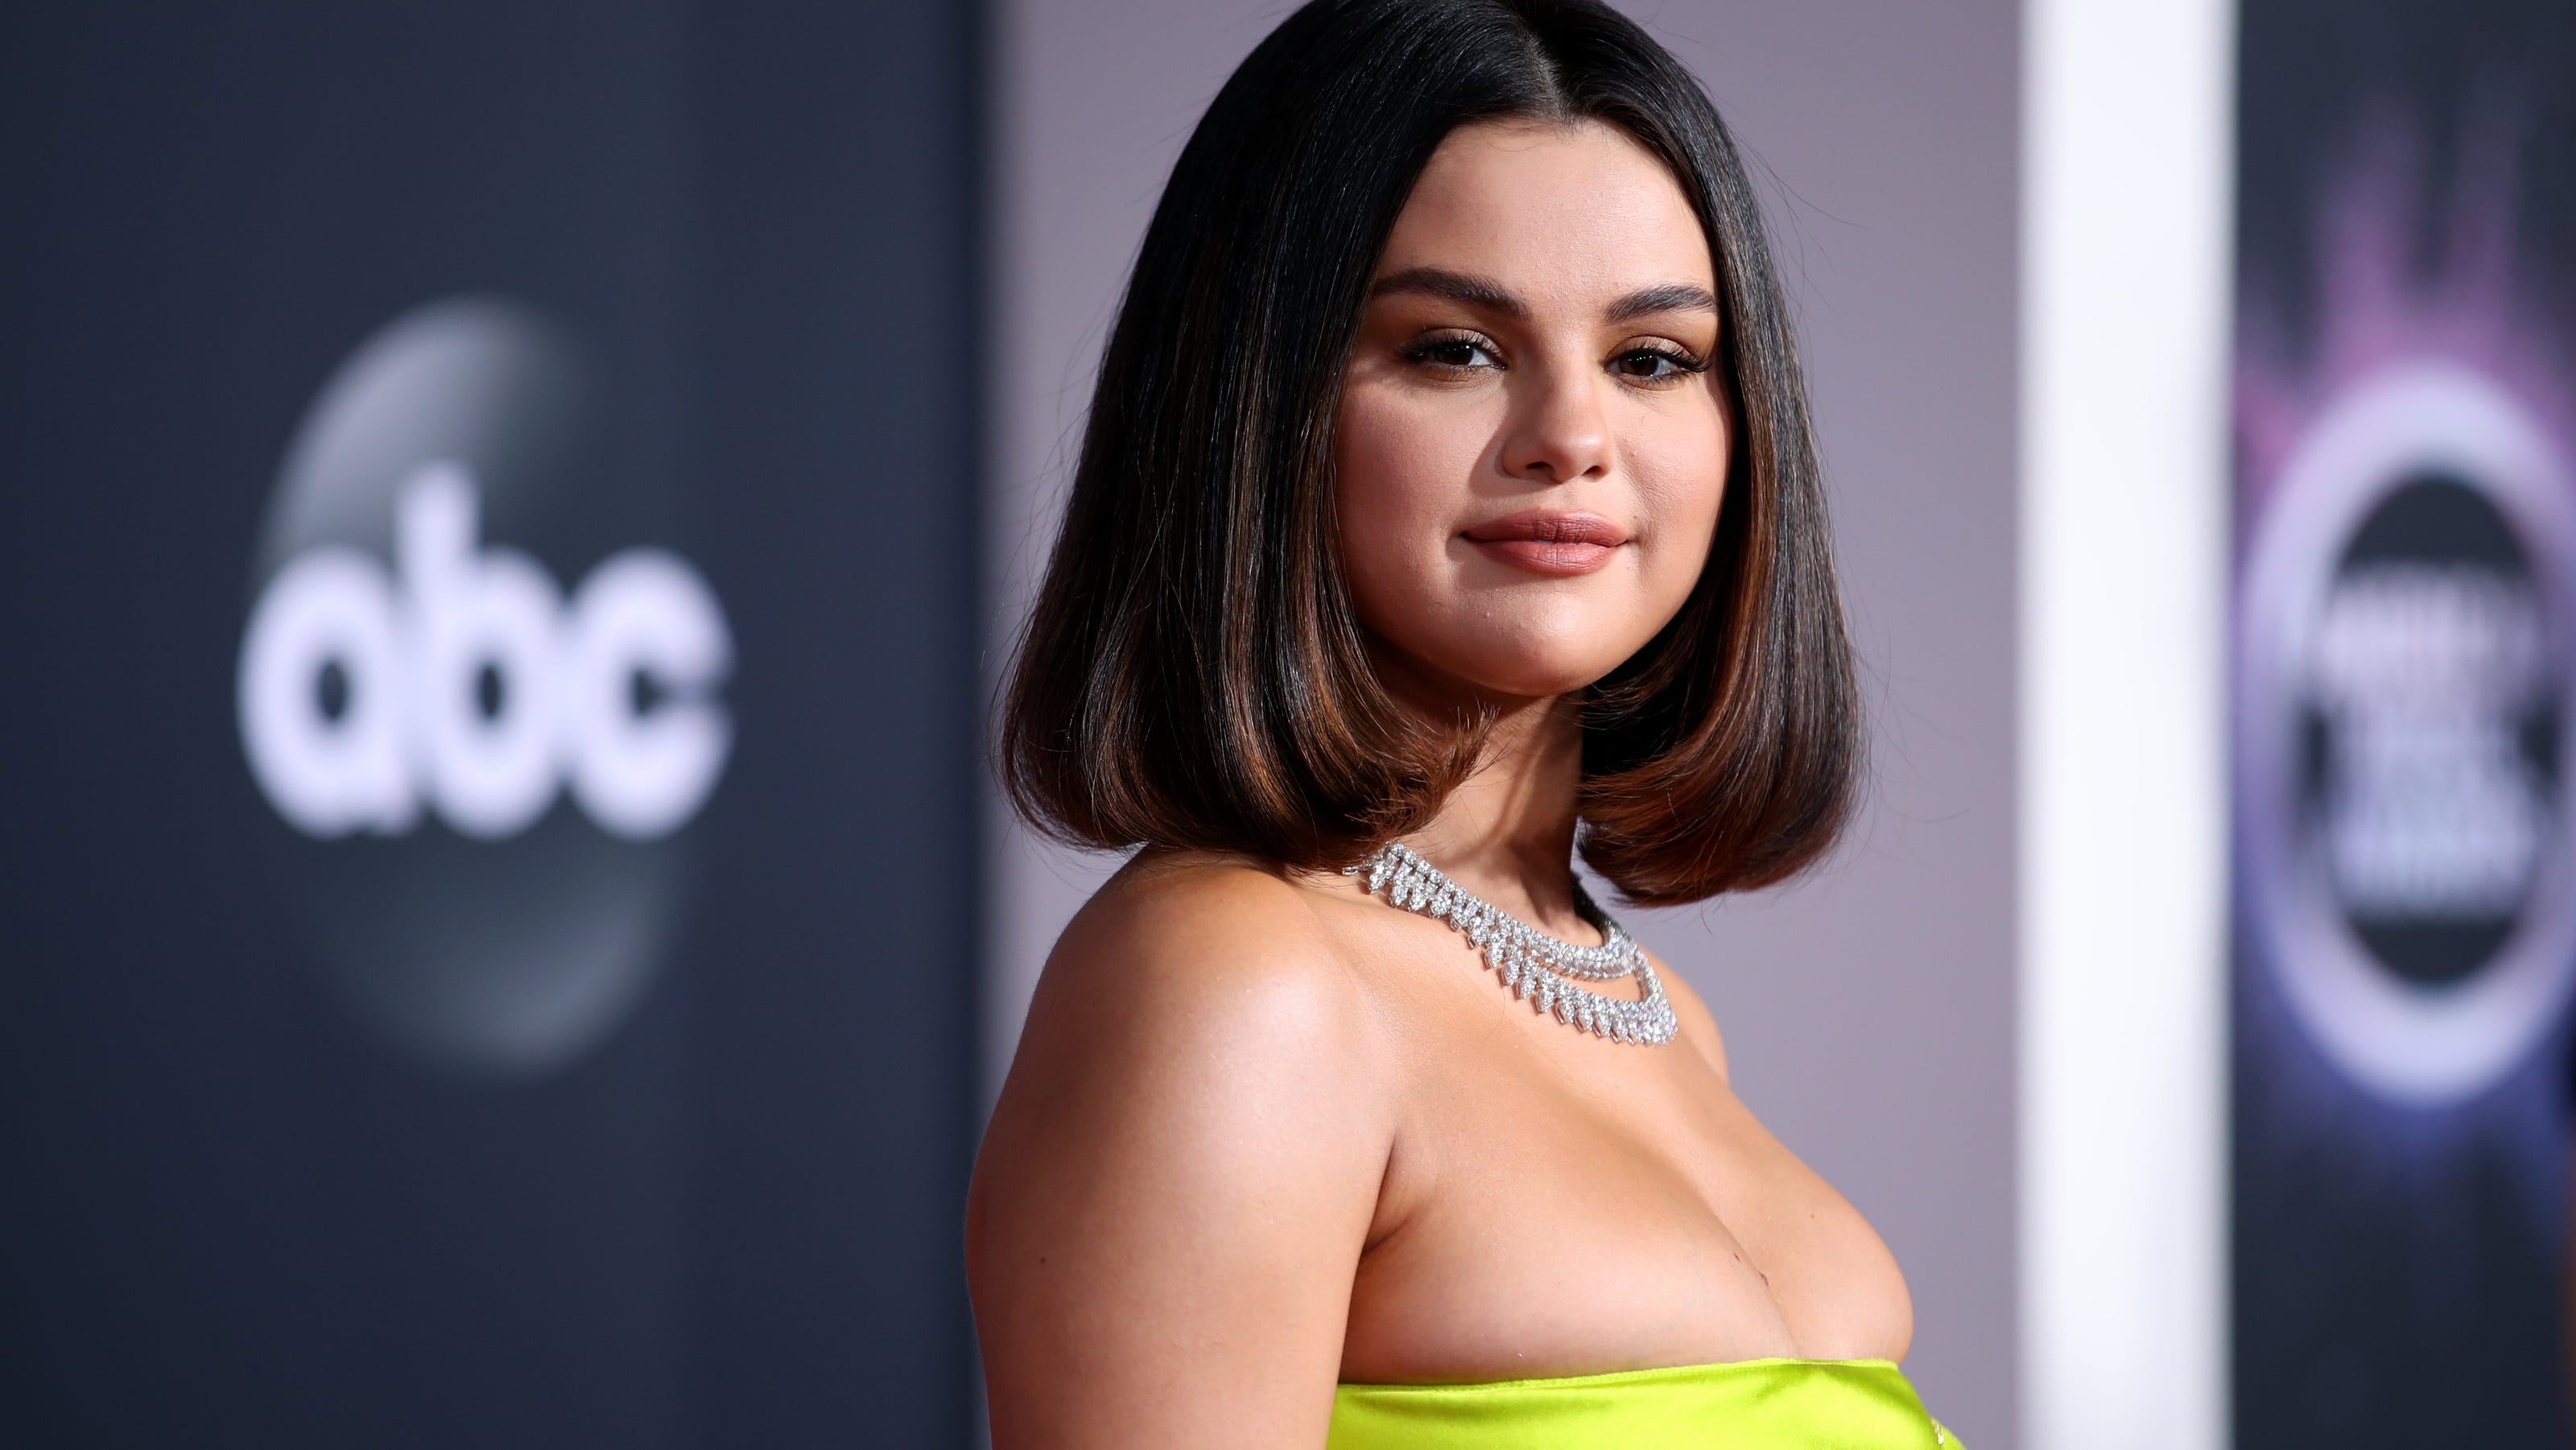 Selena Gomez says her 'past relationships' have been 'cursed.' Here's why. - USA TODAY